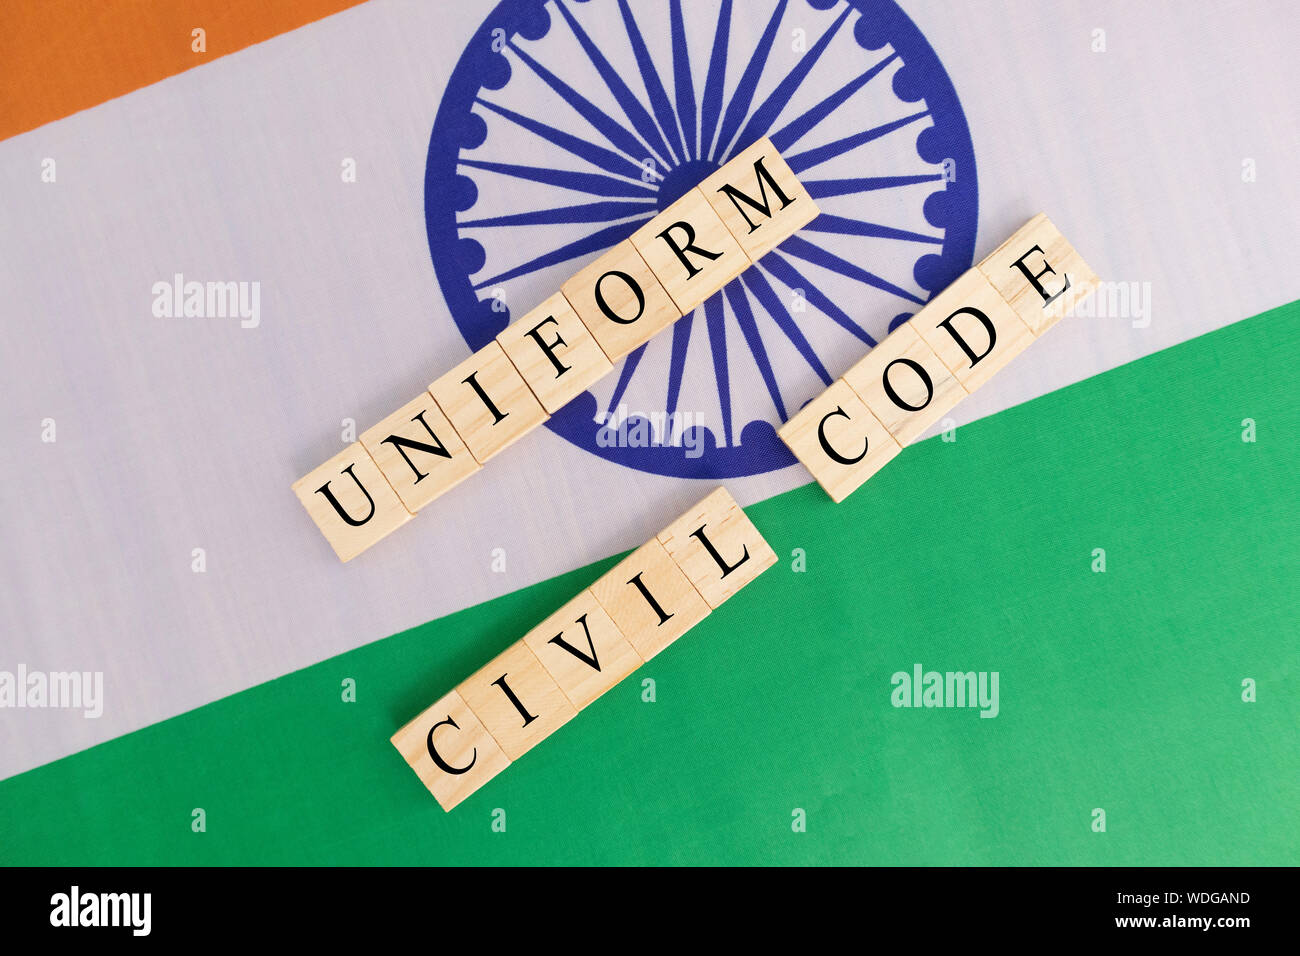 Concept of One law for all called Uniform Civil code or UCC in Indian constitution in wooden block letters on Indian flag. Stock Photo